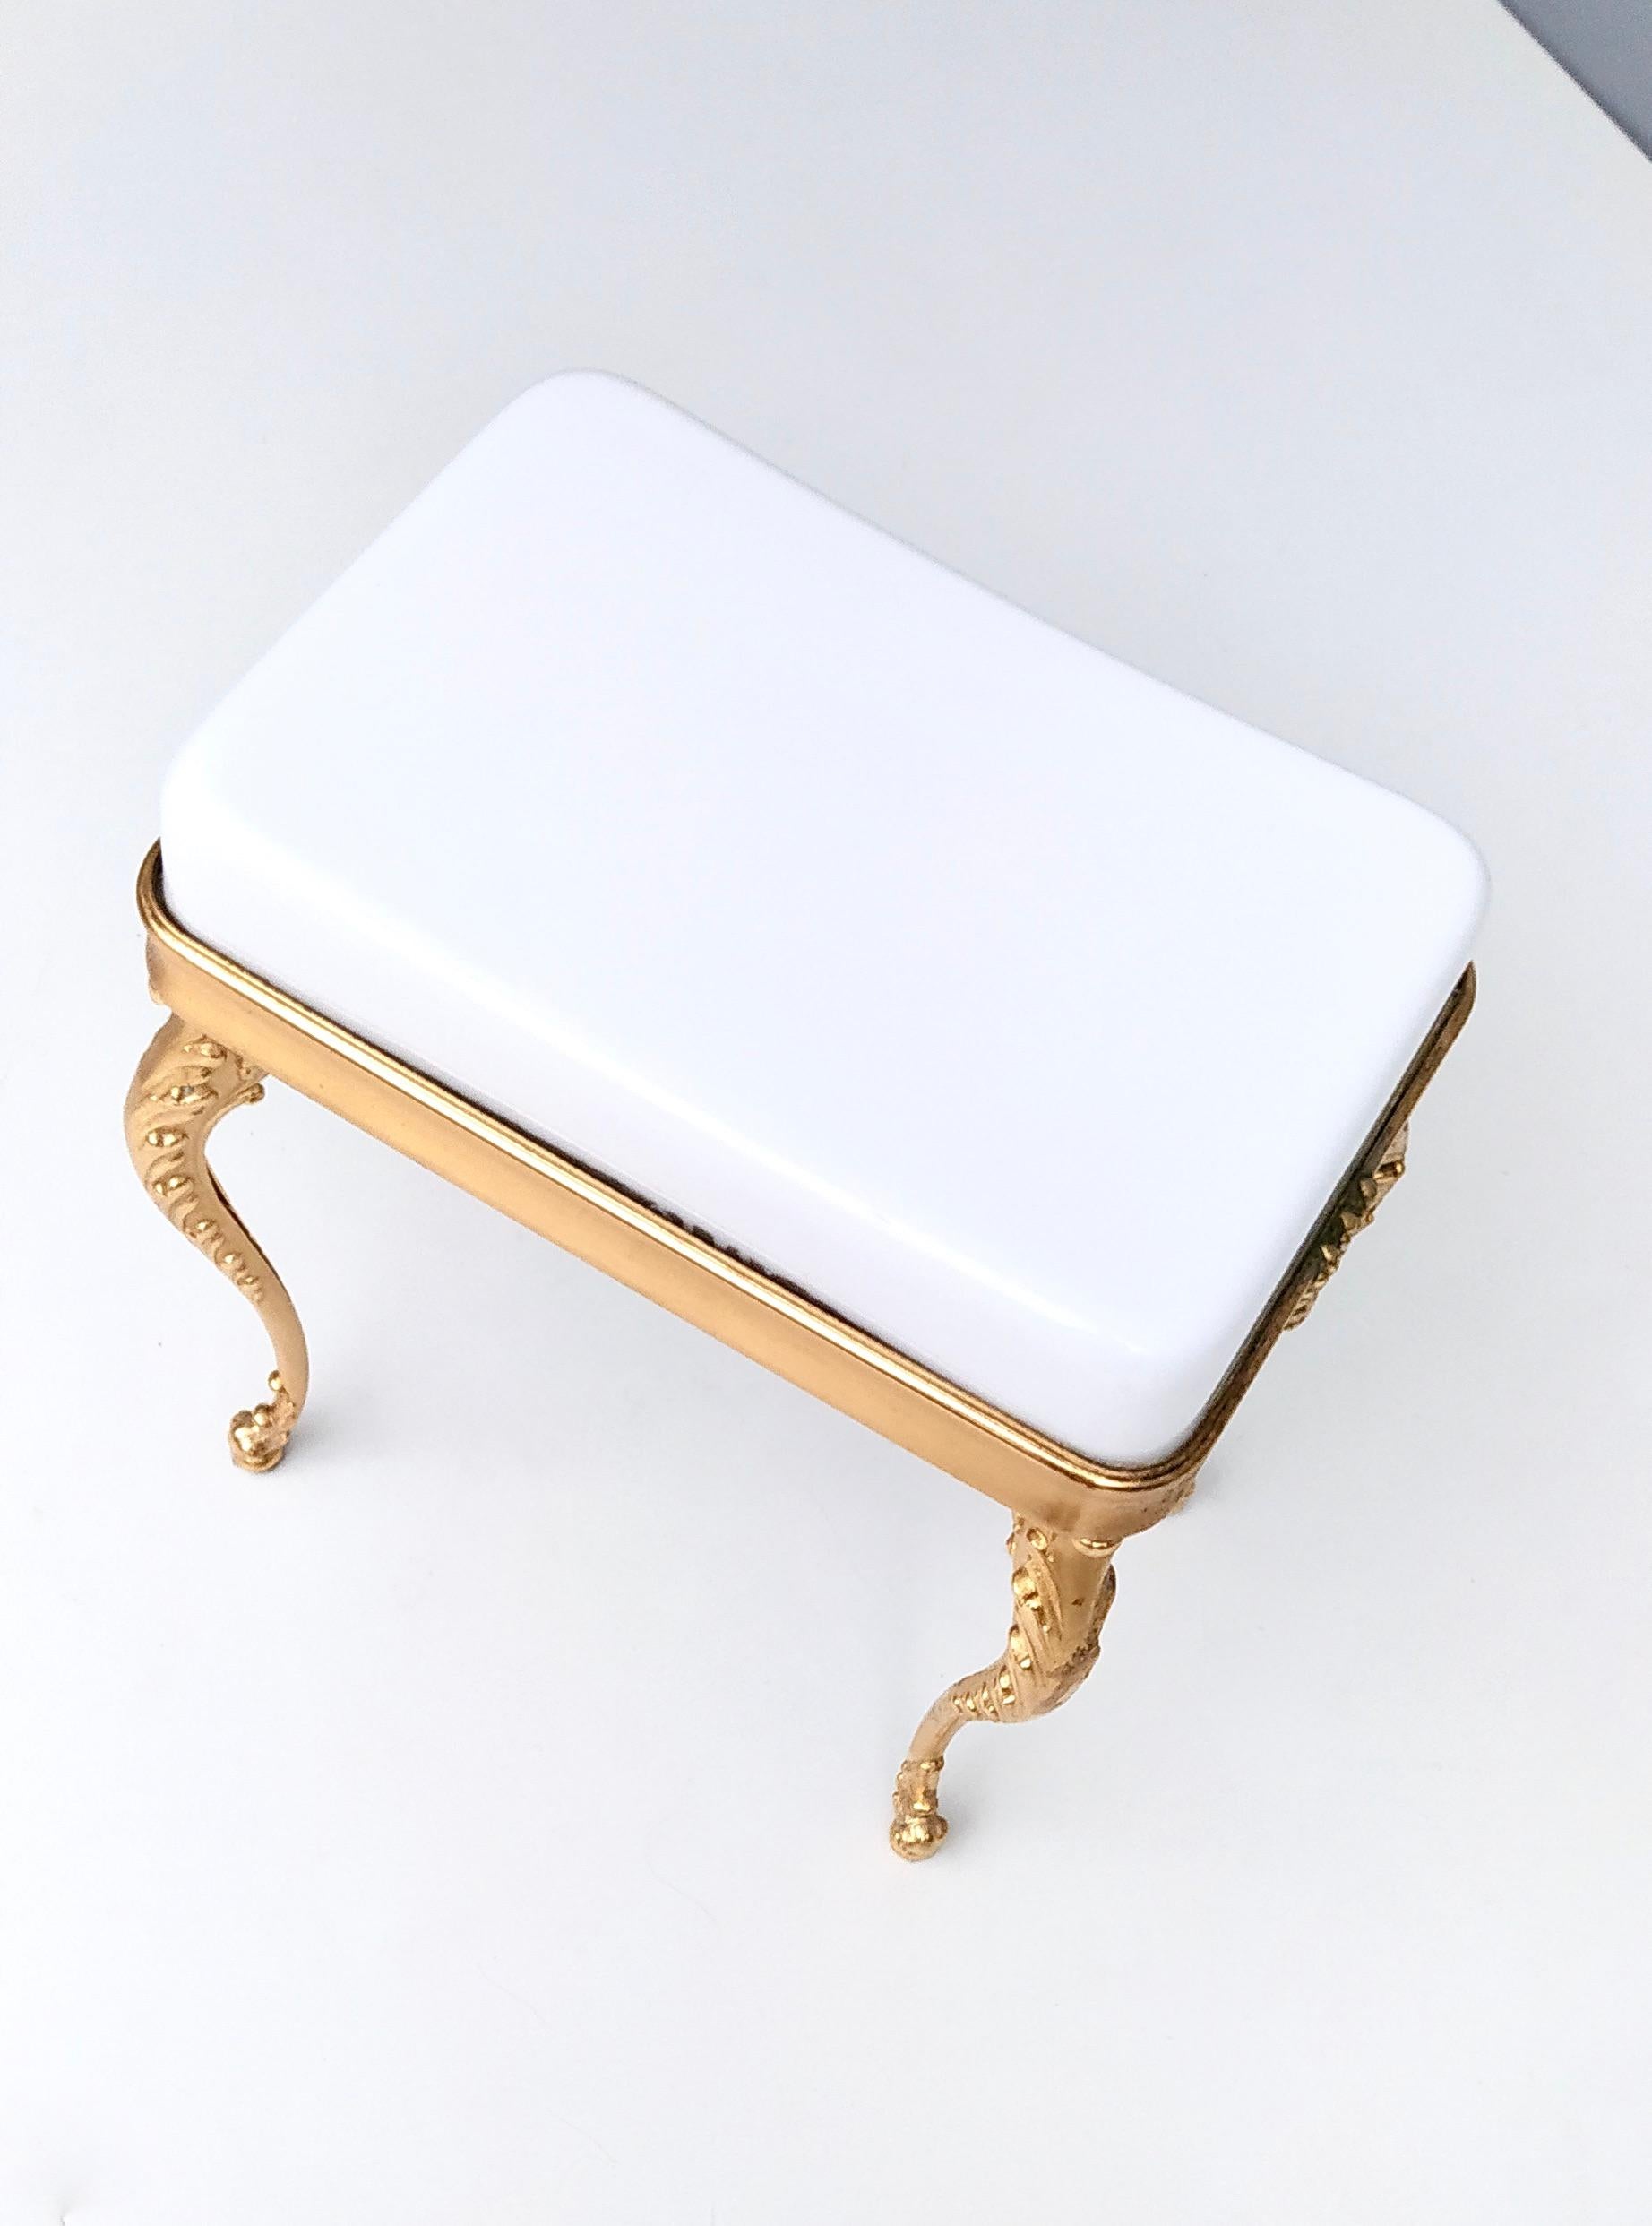 Mid-20th Century Vintage White Plastic Seat Ottoman with Cast Brass Legs, Italy For Sale